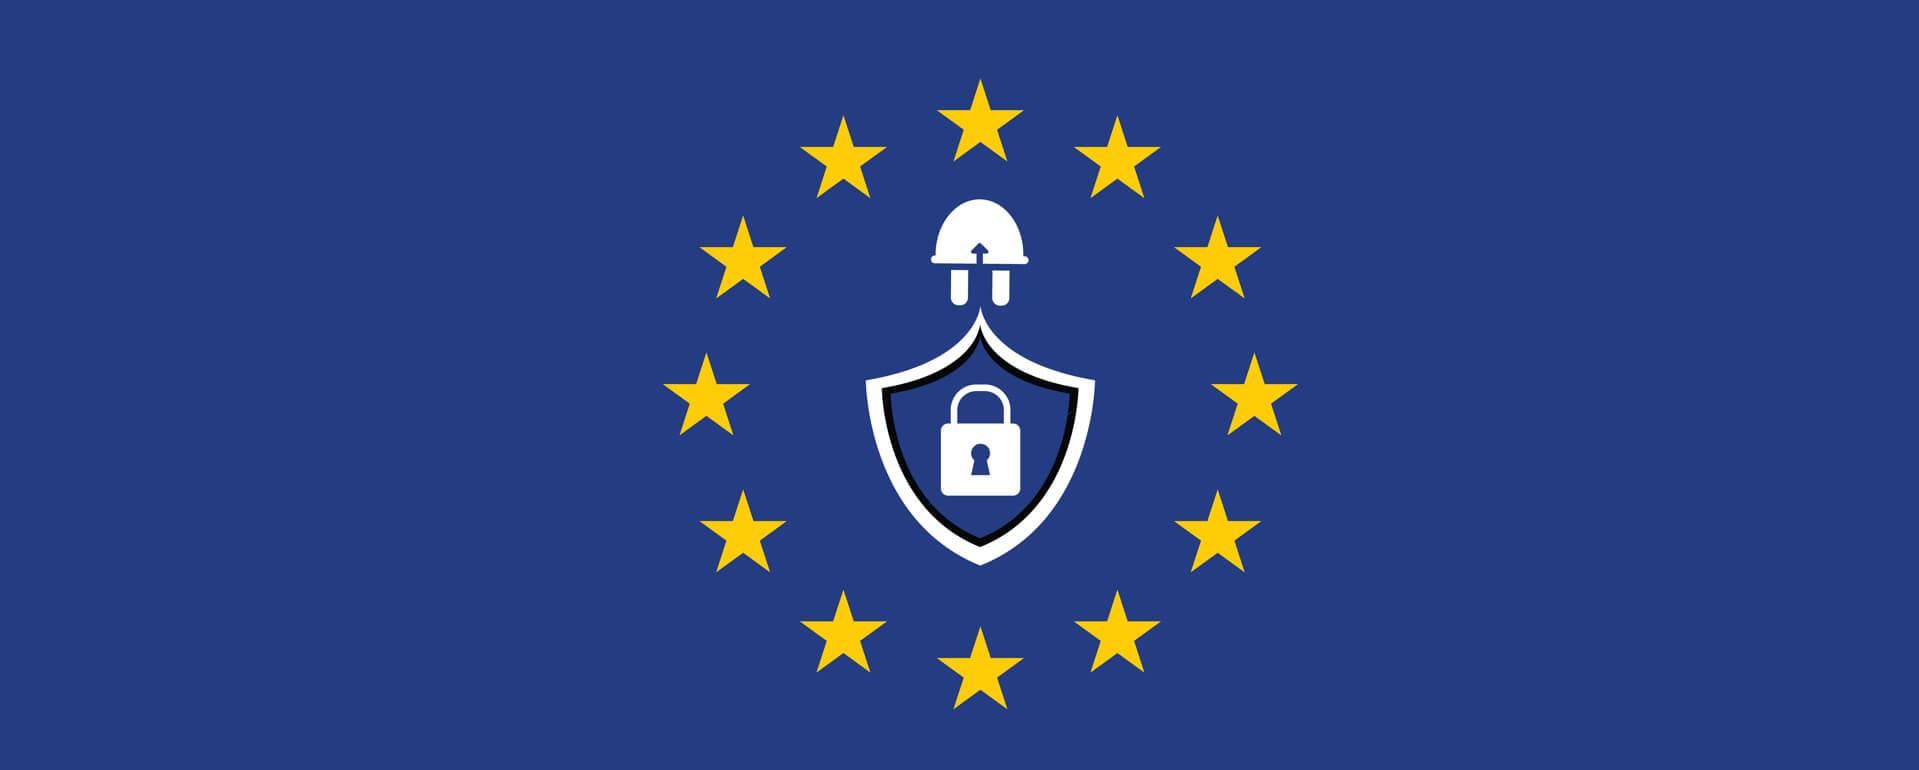 Top 5 Plugins to Make Your Website GDPR Compliant